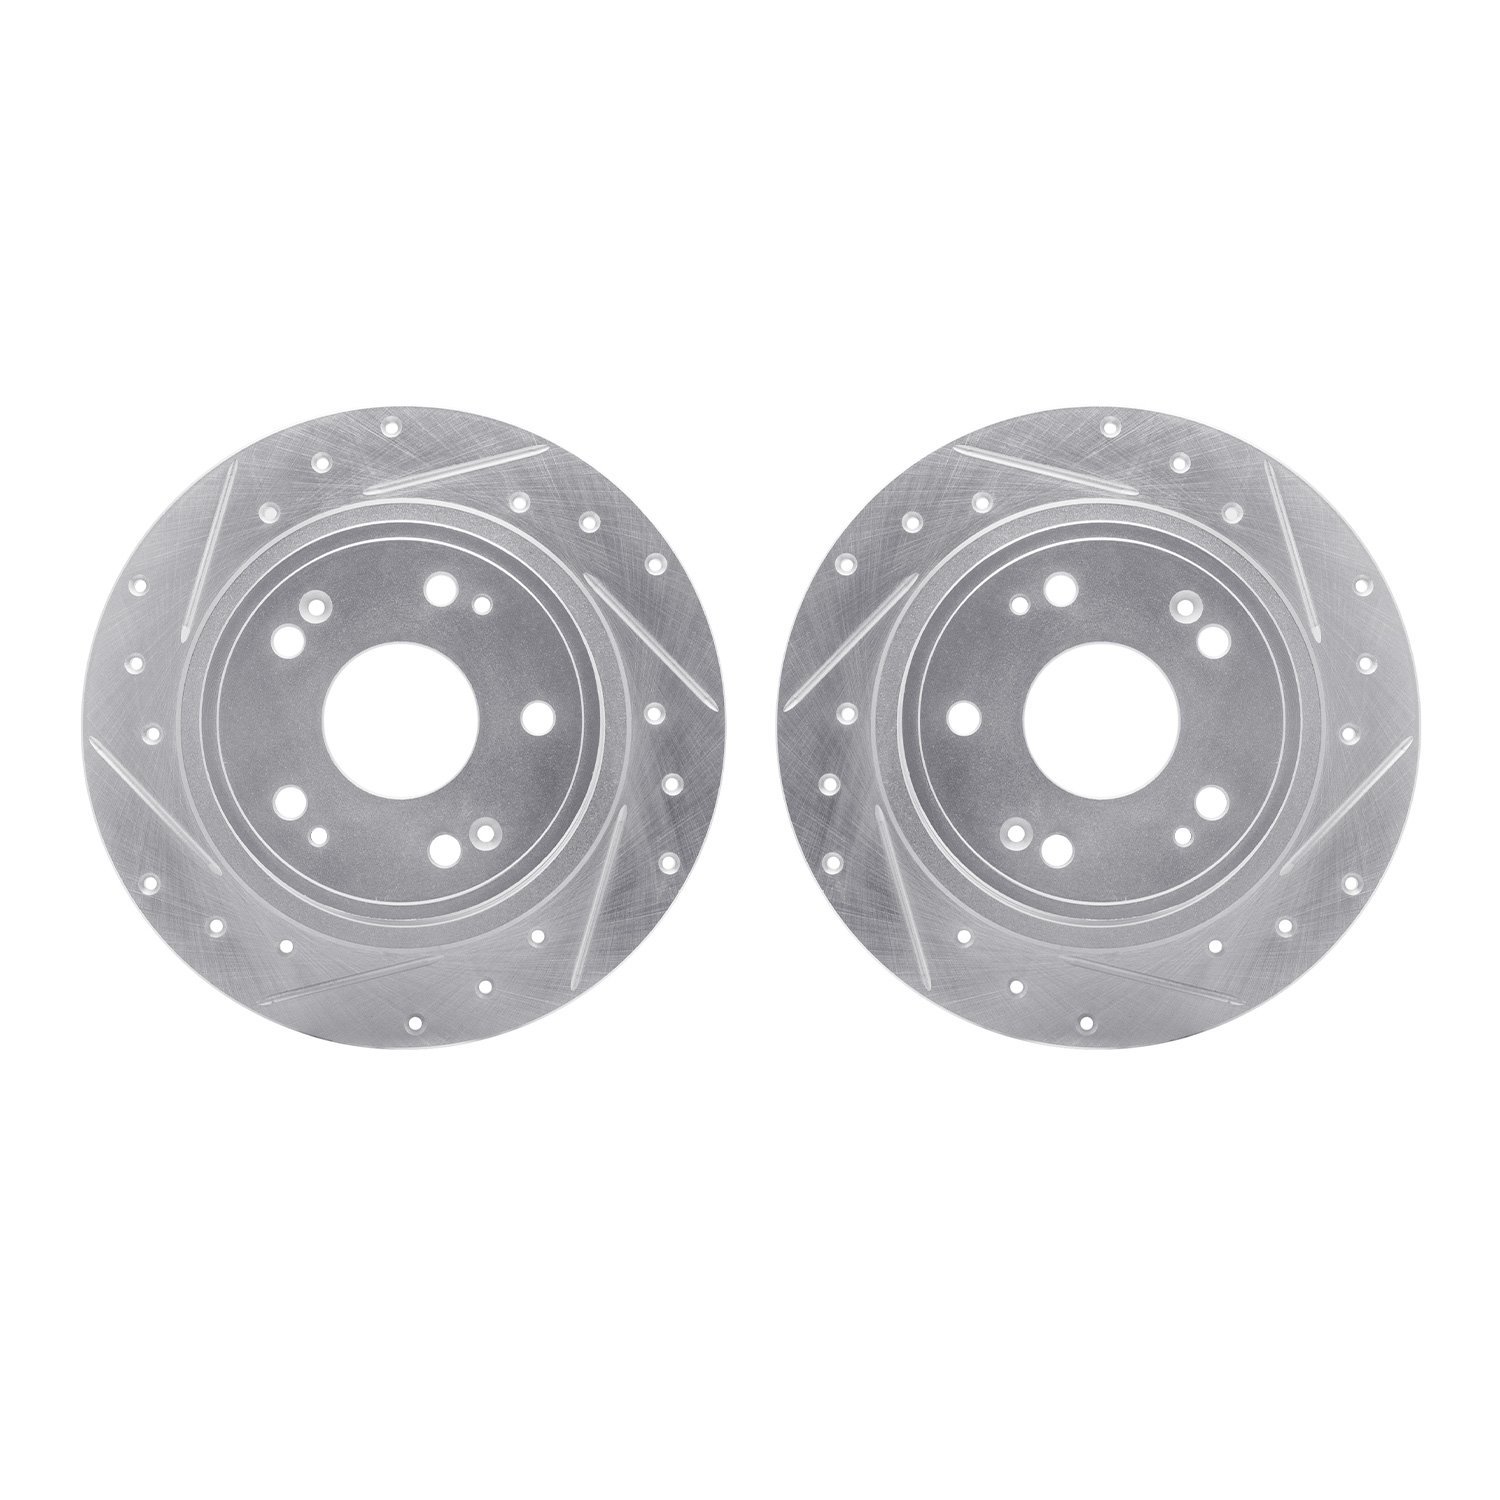 7002-59046 Drilled/Slotted Brake Rotors [Silver], Fits Select Acura/Honda, Position: Rear